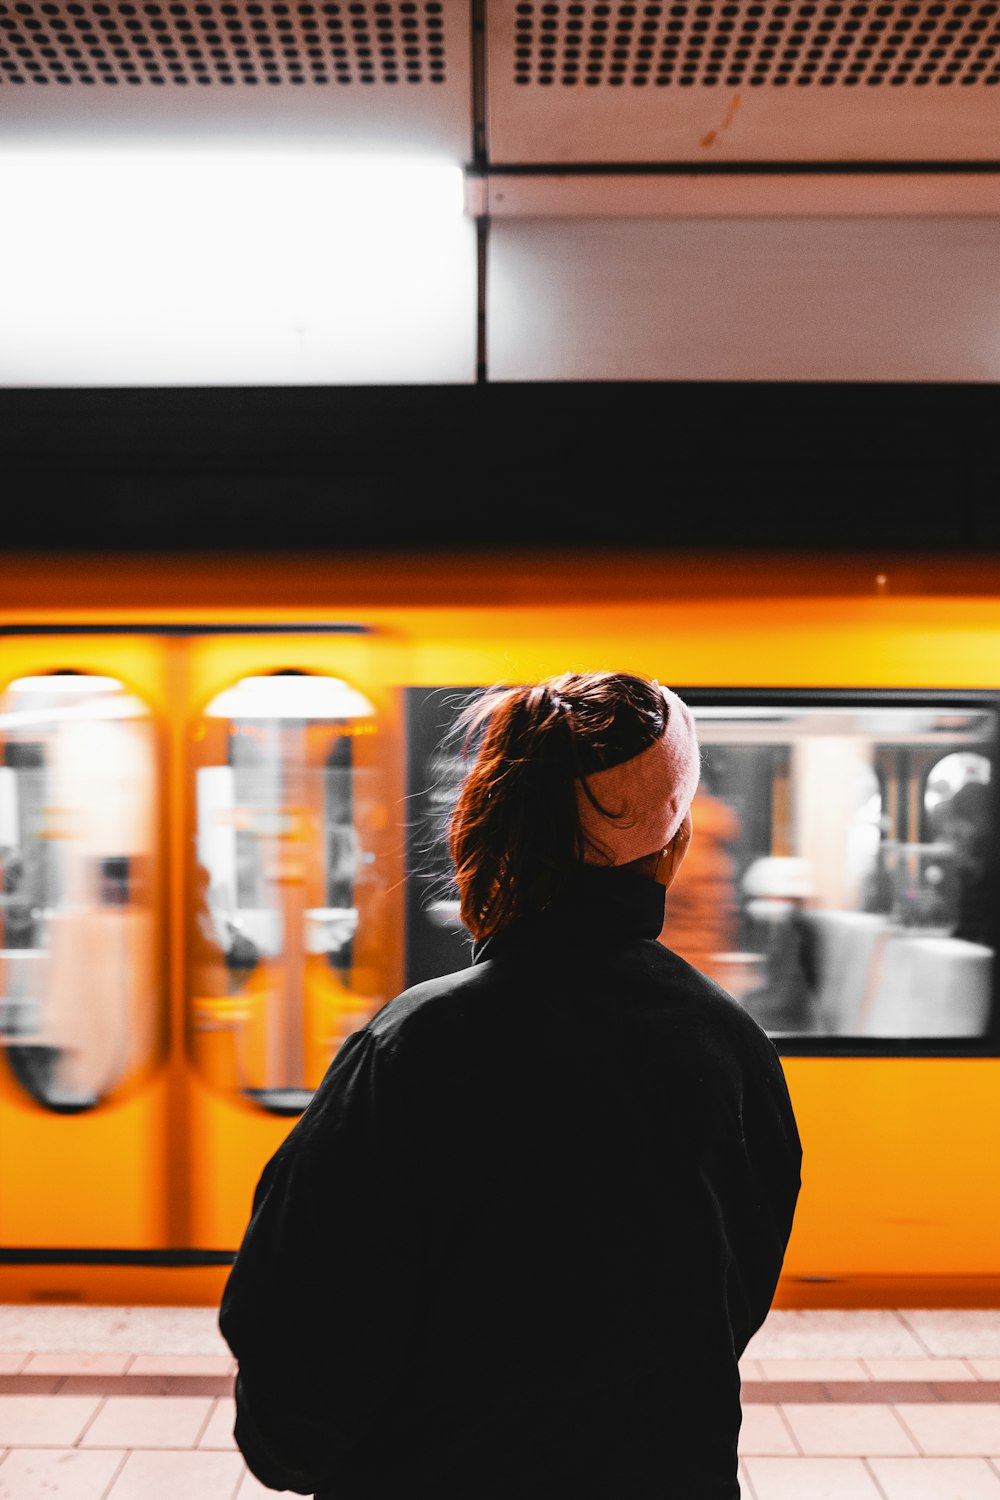 a person standing in front of a yellow train